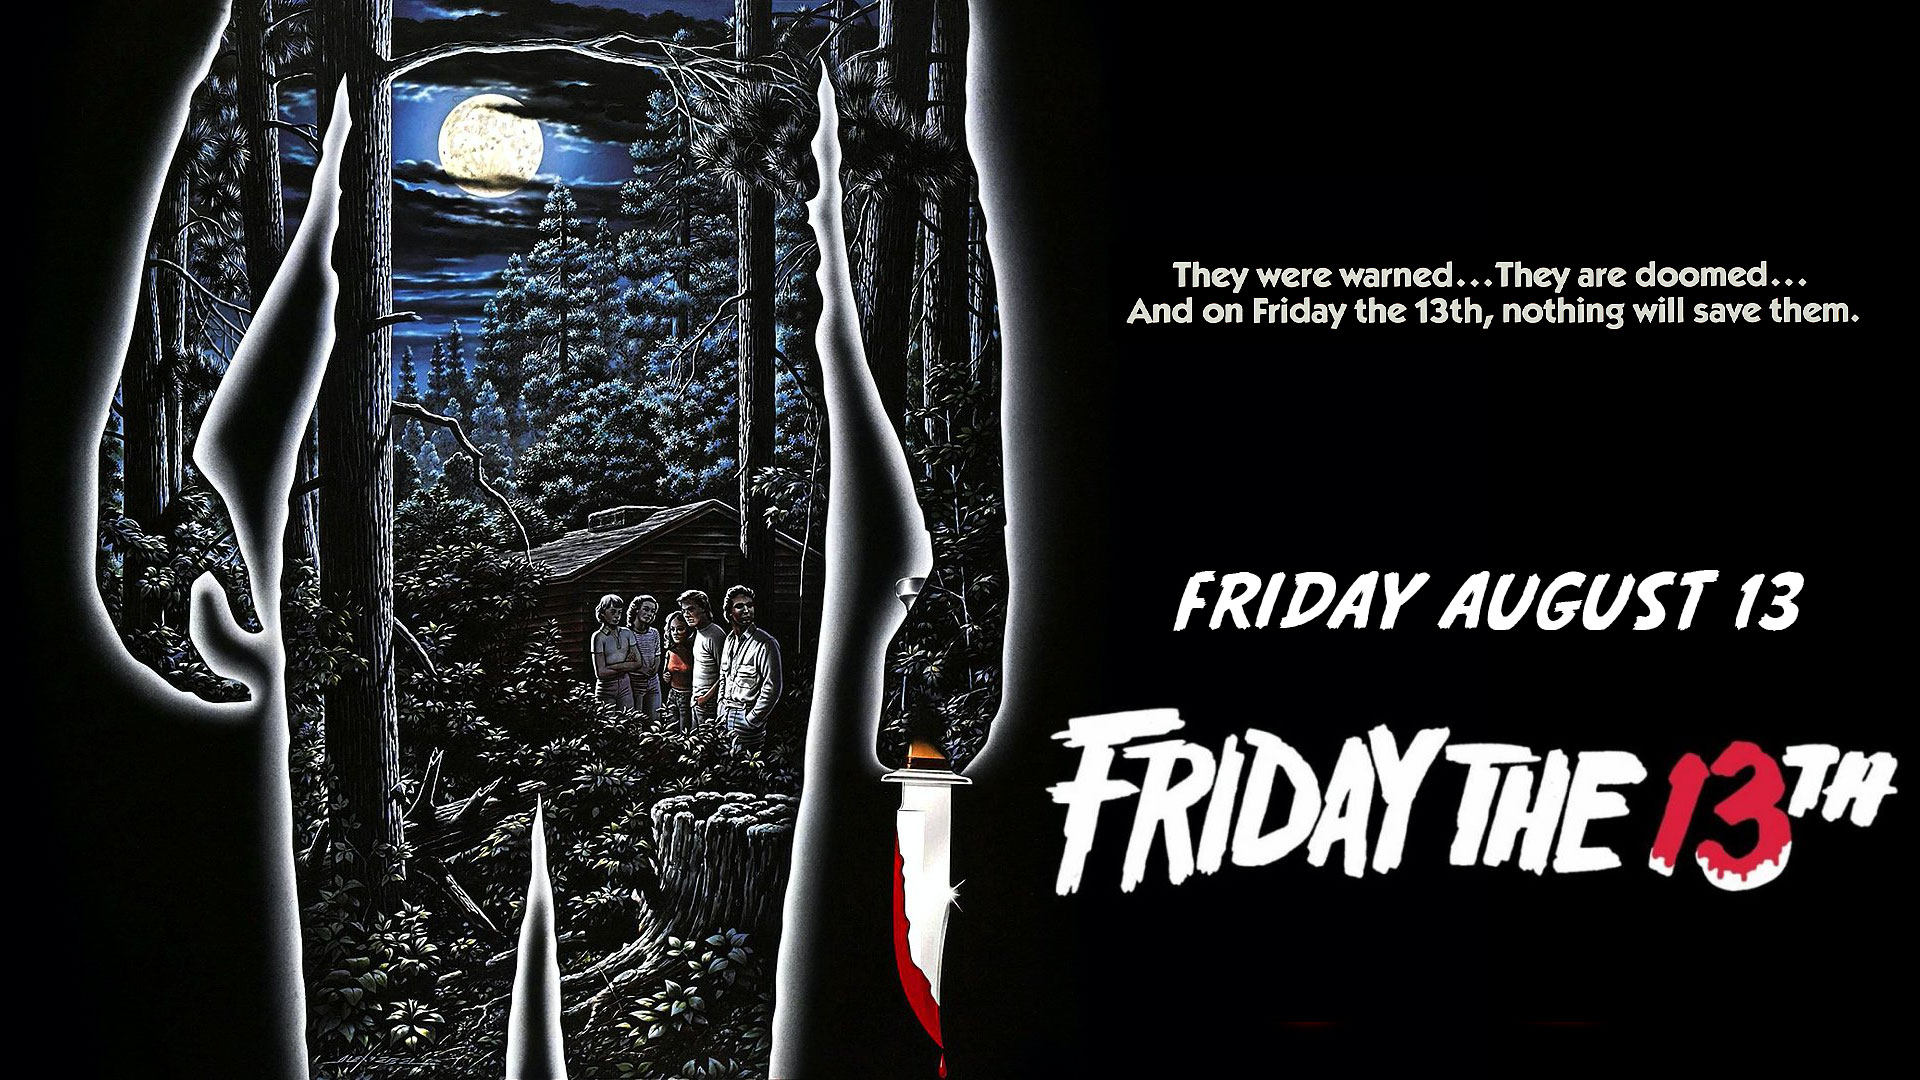 Friday the 13th (1980) Horror Movie Drinking Game and Podcast